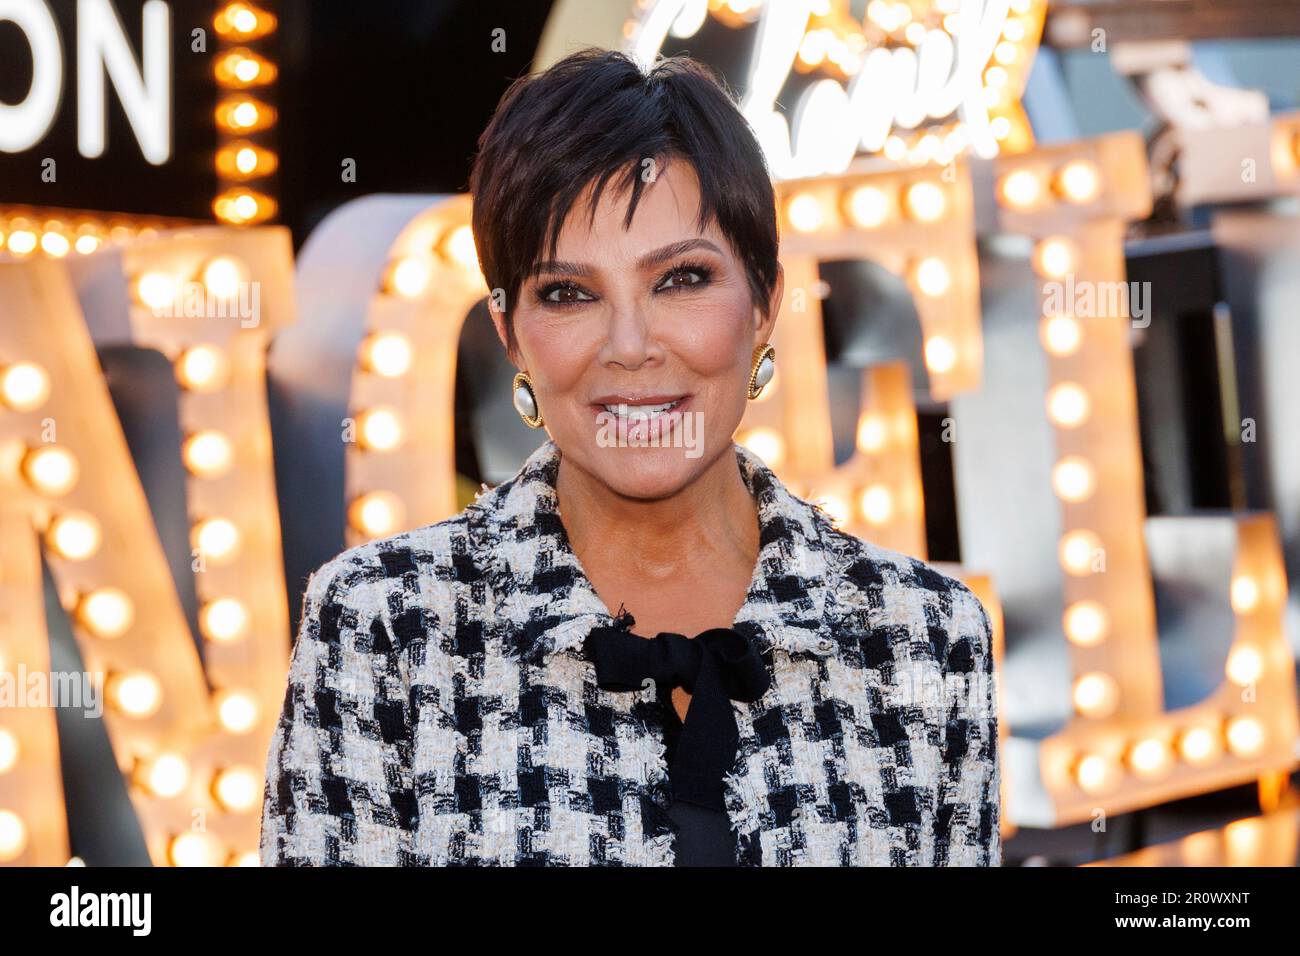 Kris Jenner arrives at the Chanel Cruise 2022/2023 Fashion Show on